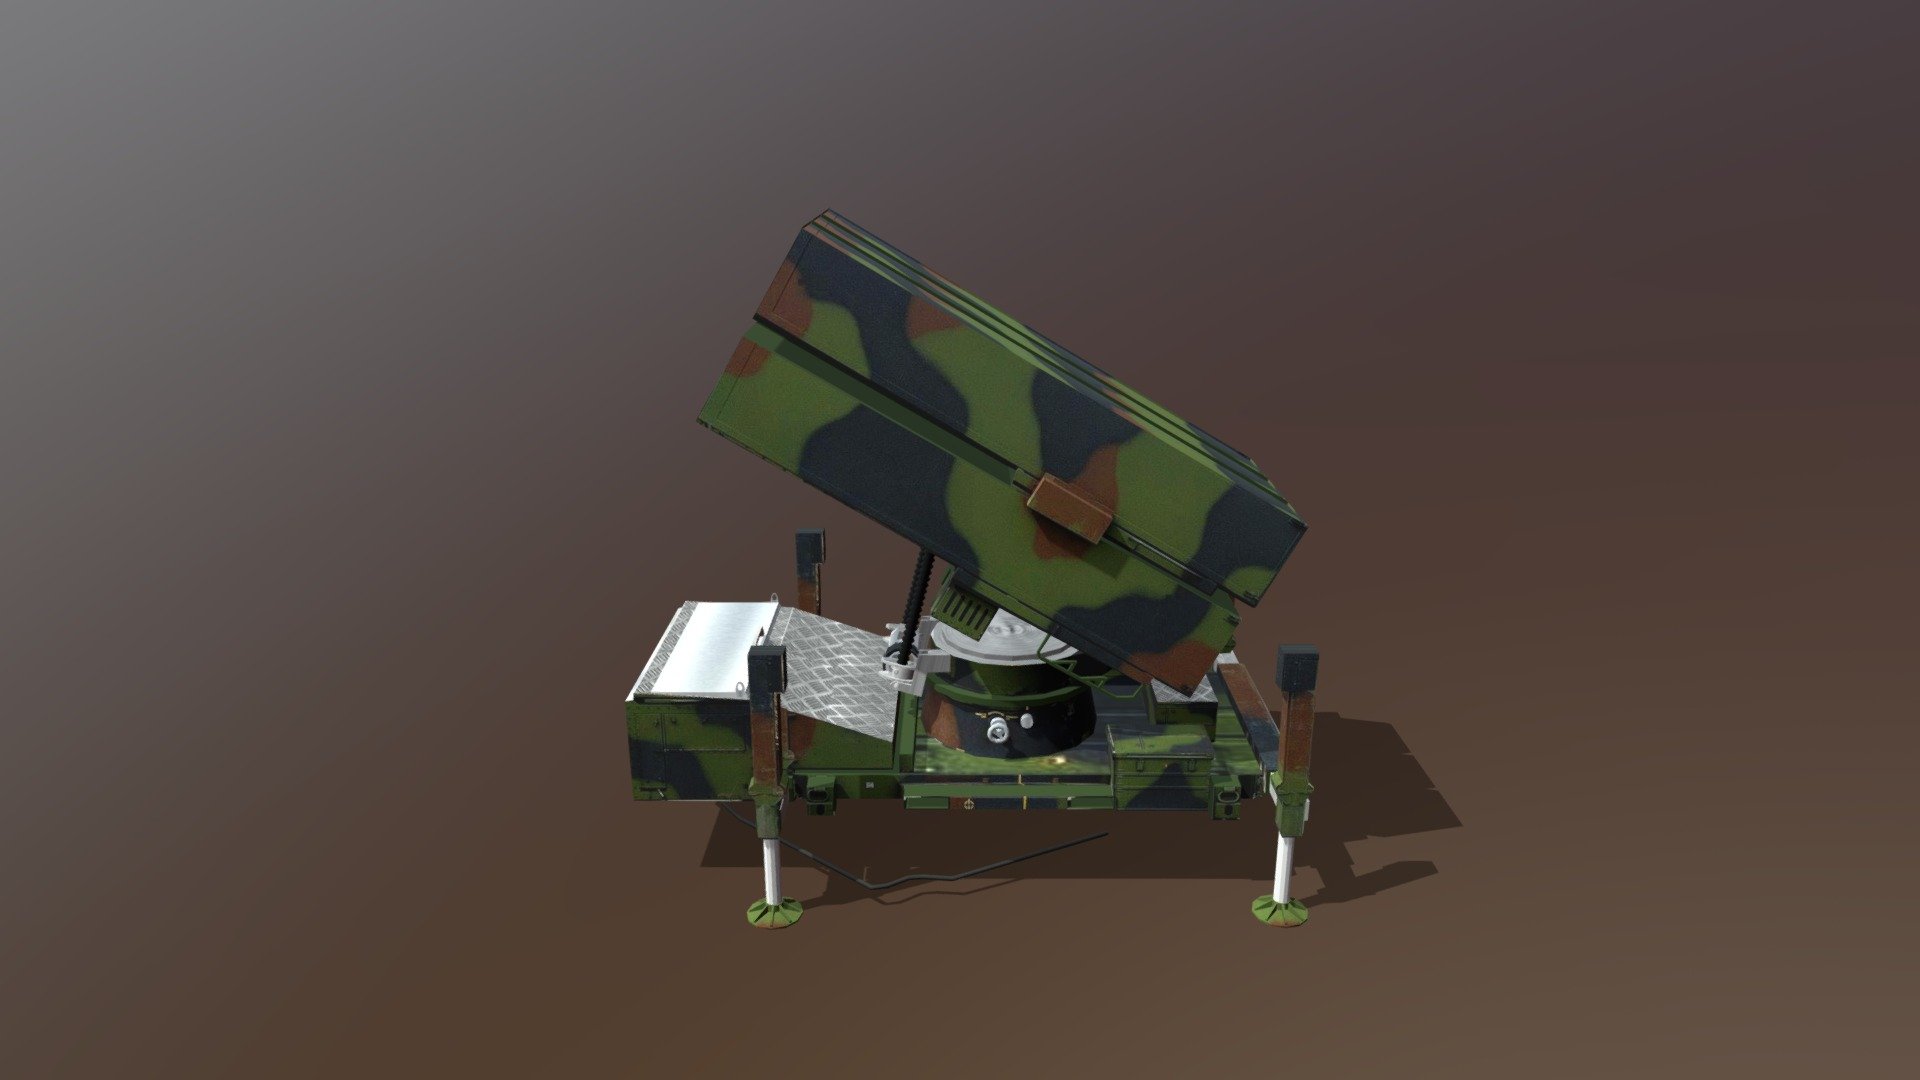 This model is Nasams Air Defences or anti-air.
This model is High quality and low poly model.
This model applied a single texture UV maping method.
This model can be used in Game programing and animation films 3d model